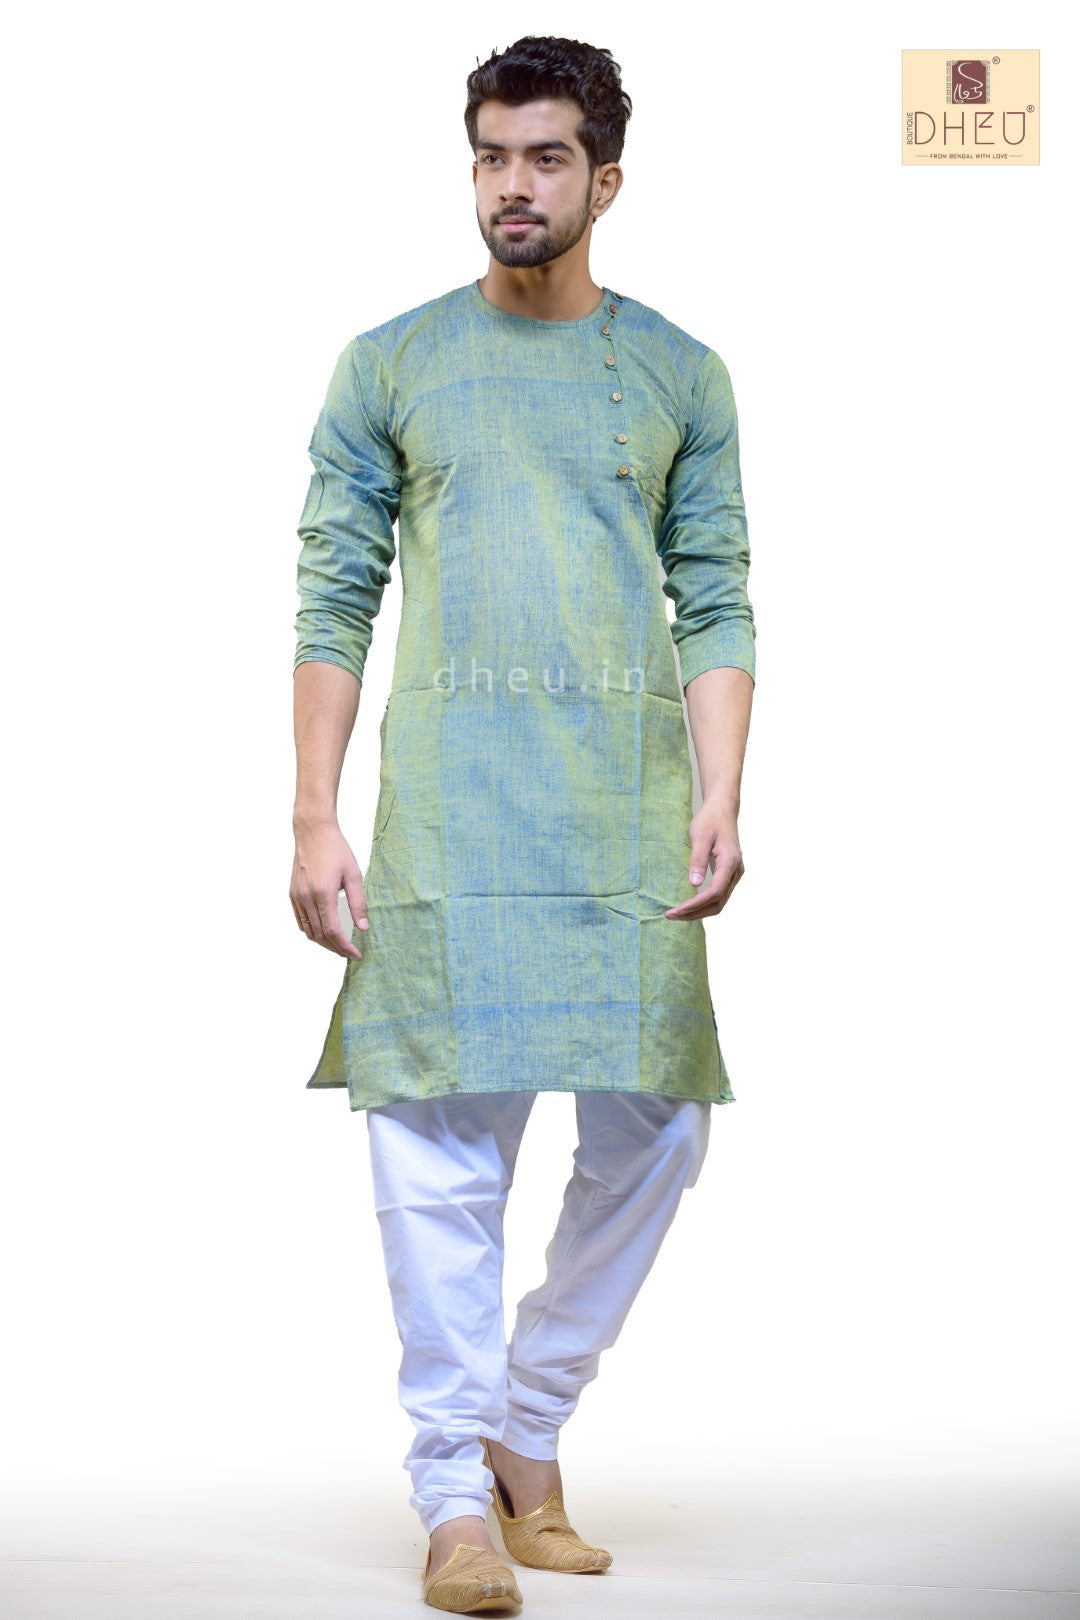 Vibrant moss green designer kurta at low cost in dheu.in